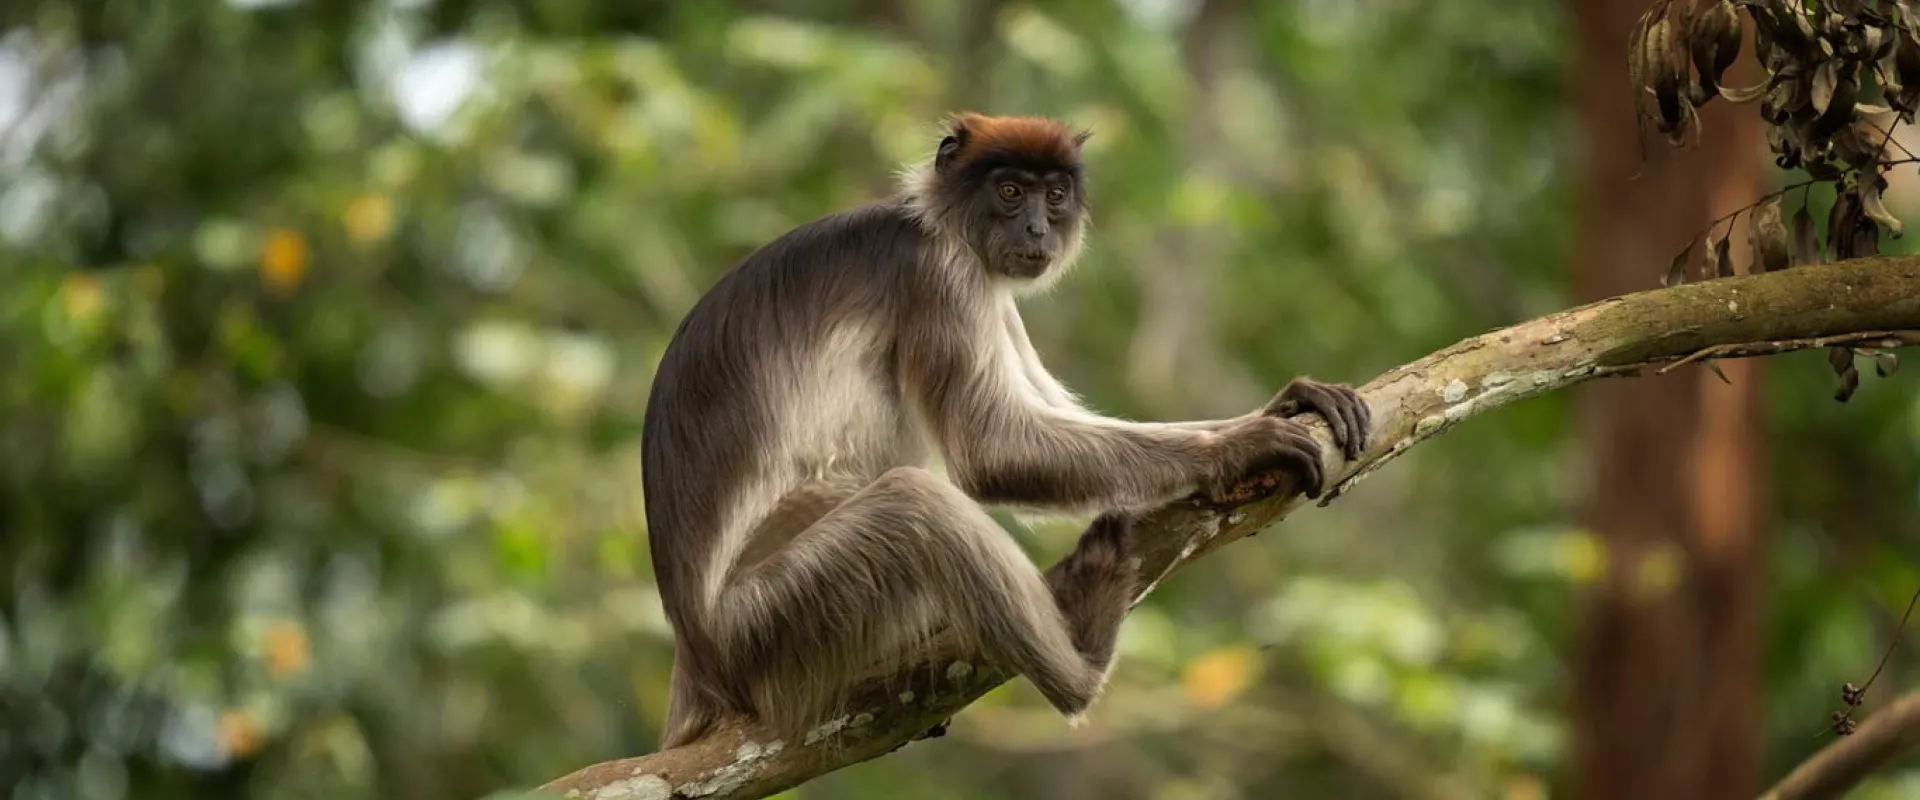 Conserving Red Colobus - Africa’s Most Threatened Monkey Group